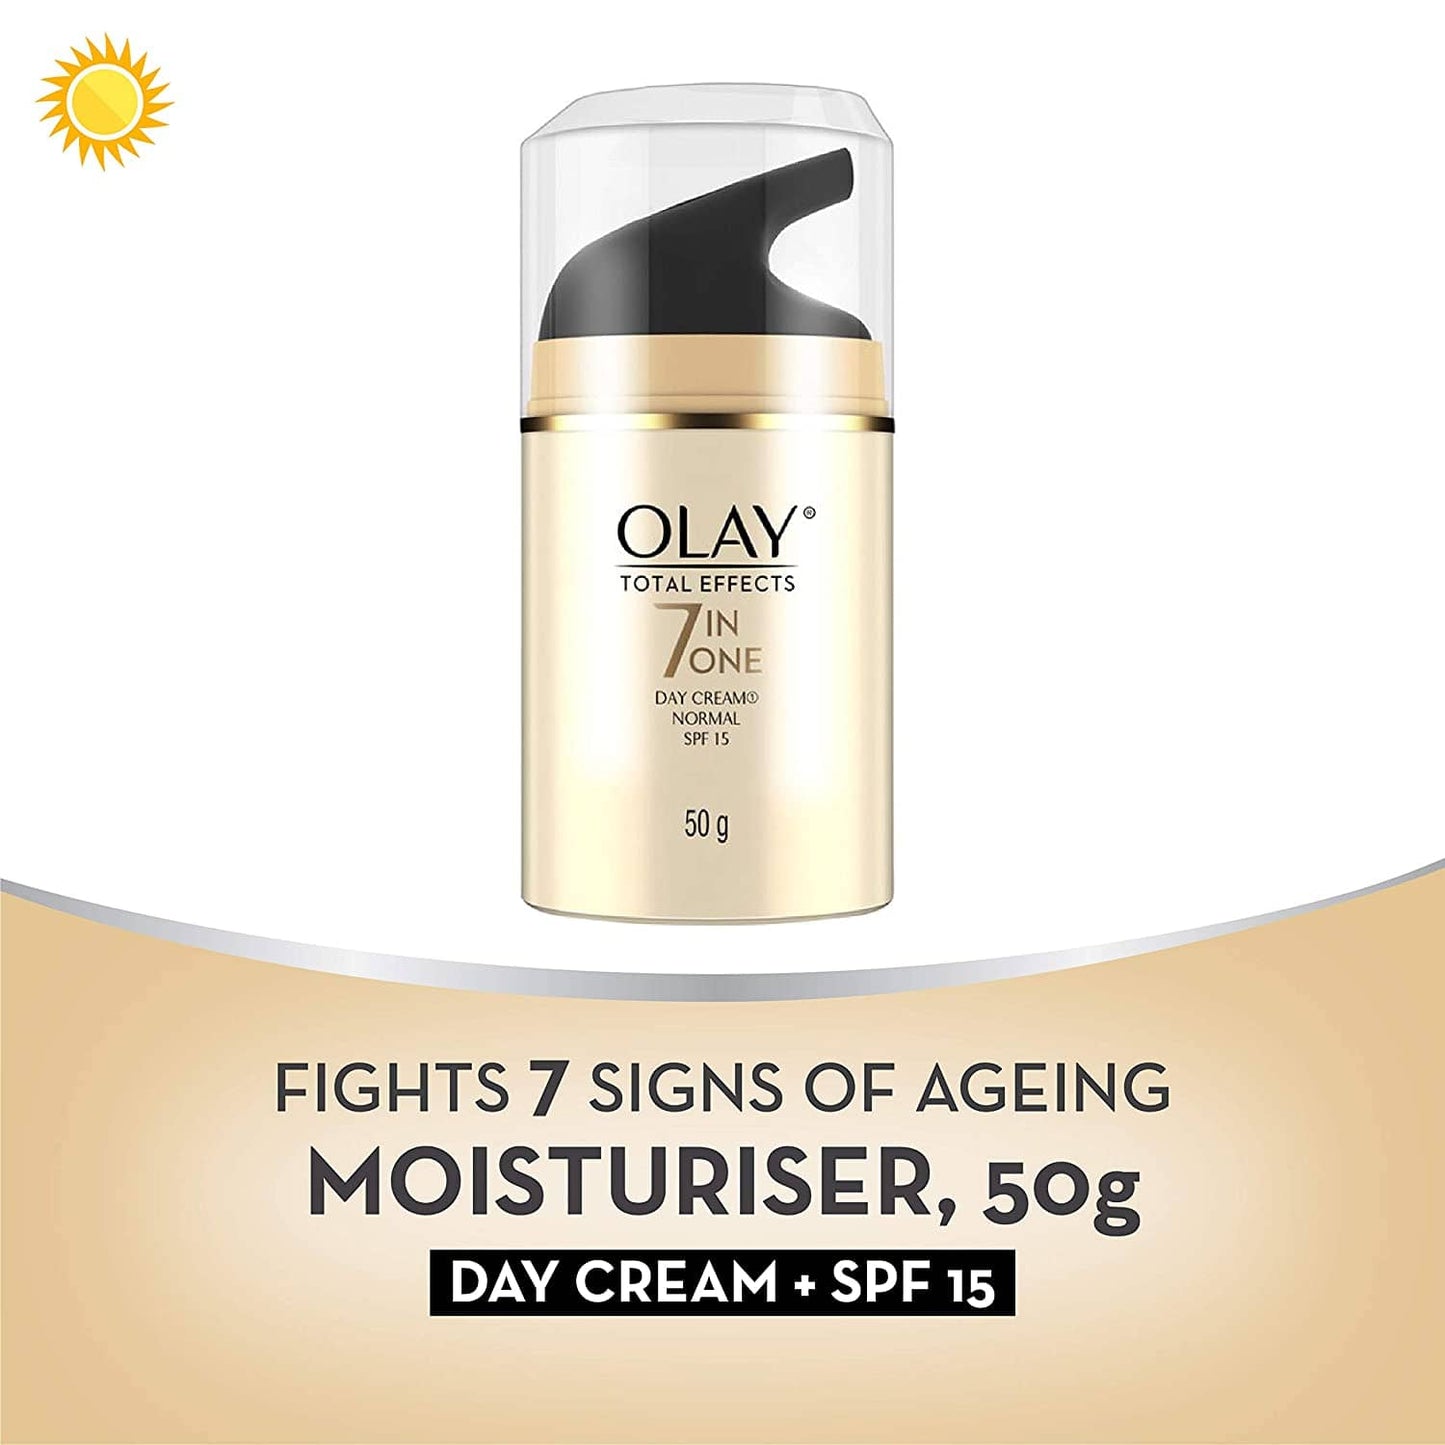 Olay 7 In One Day Cream Normal SPF 15 with Vitamin B5